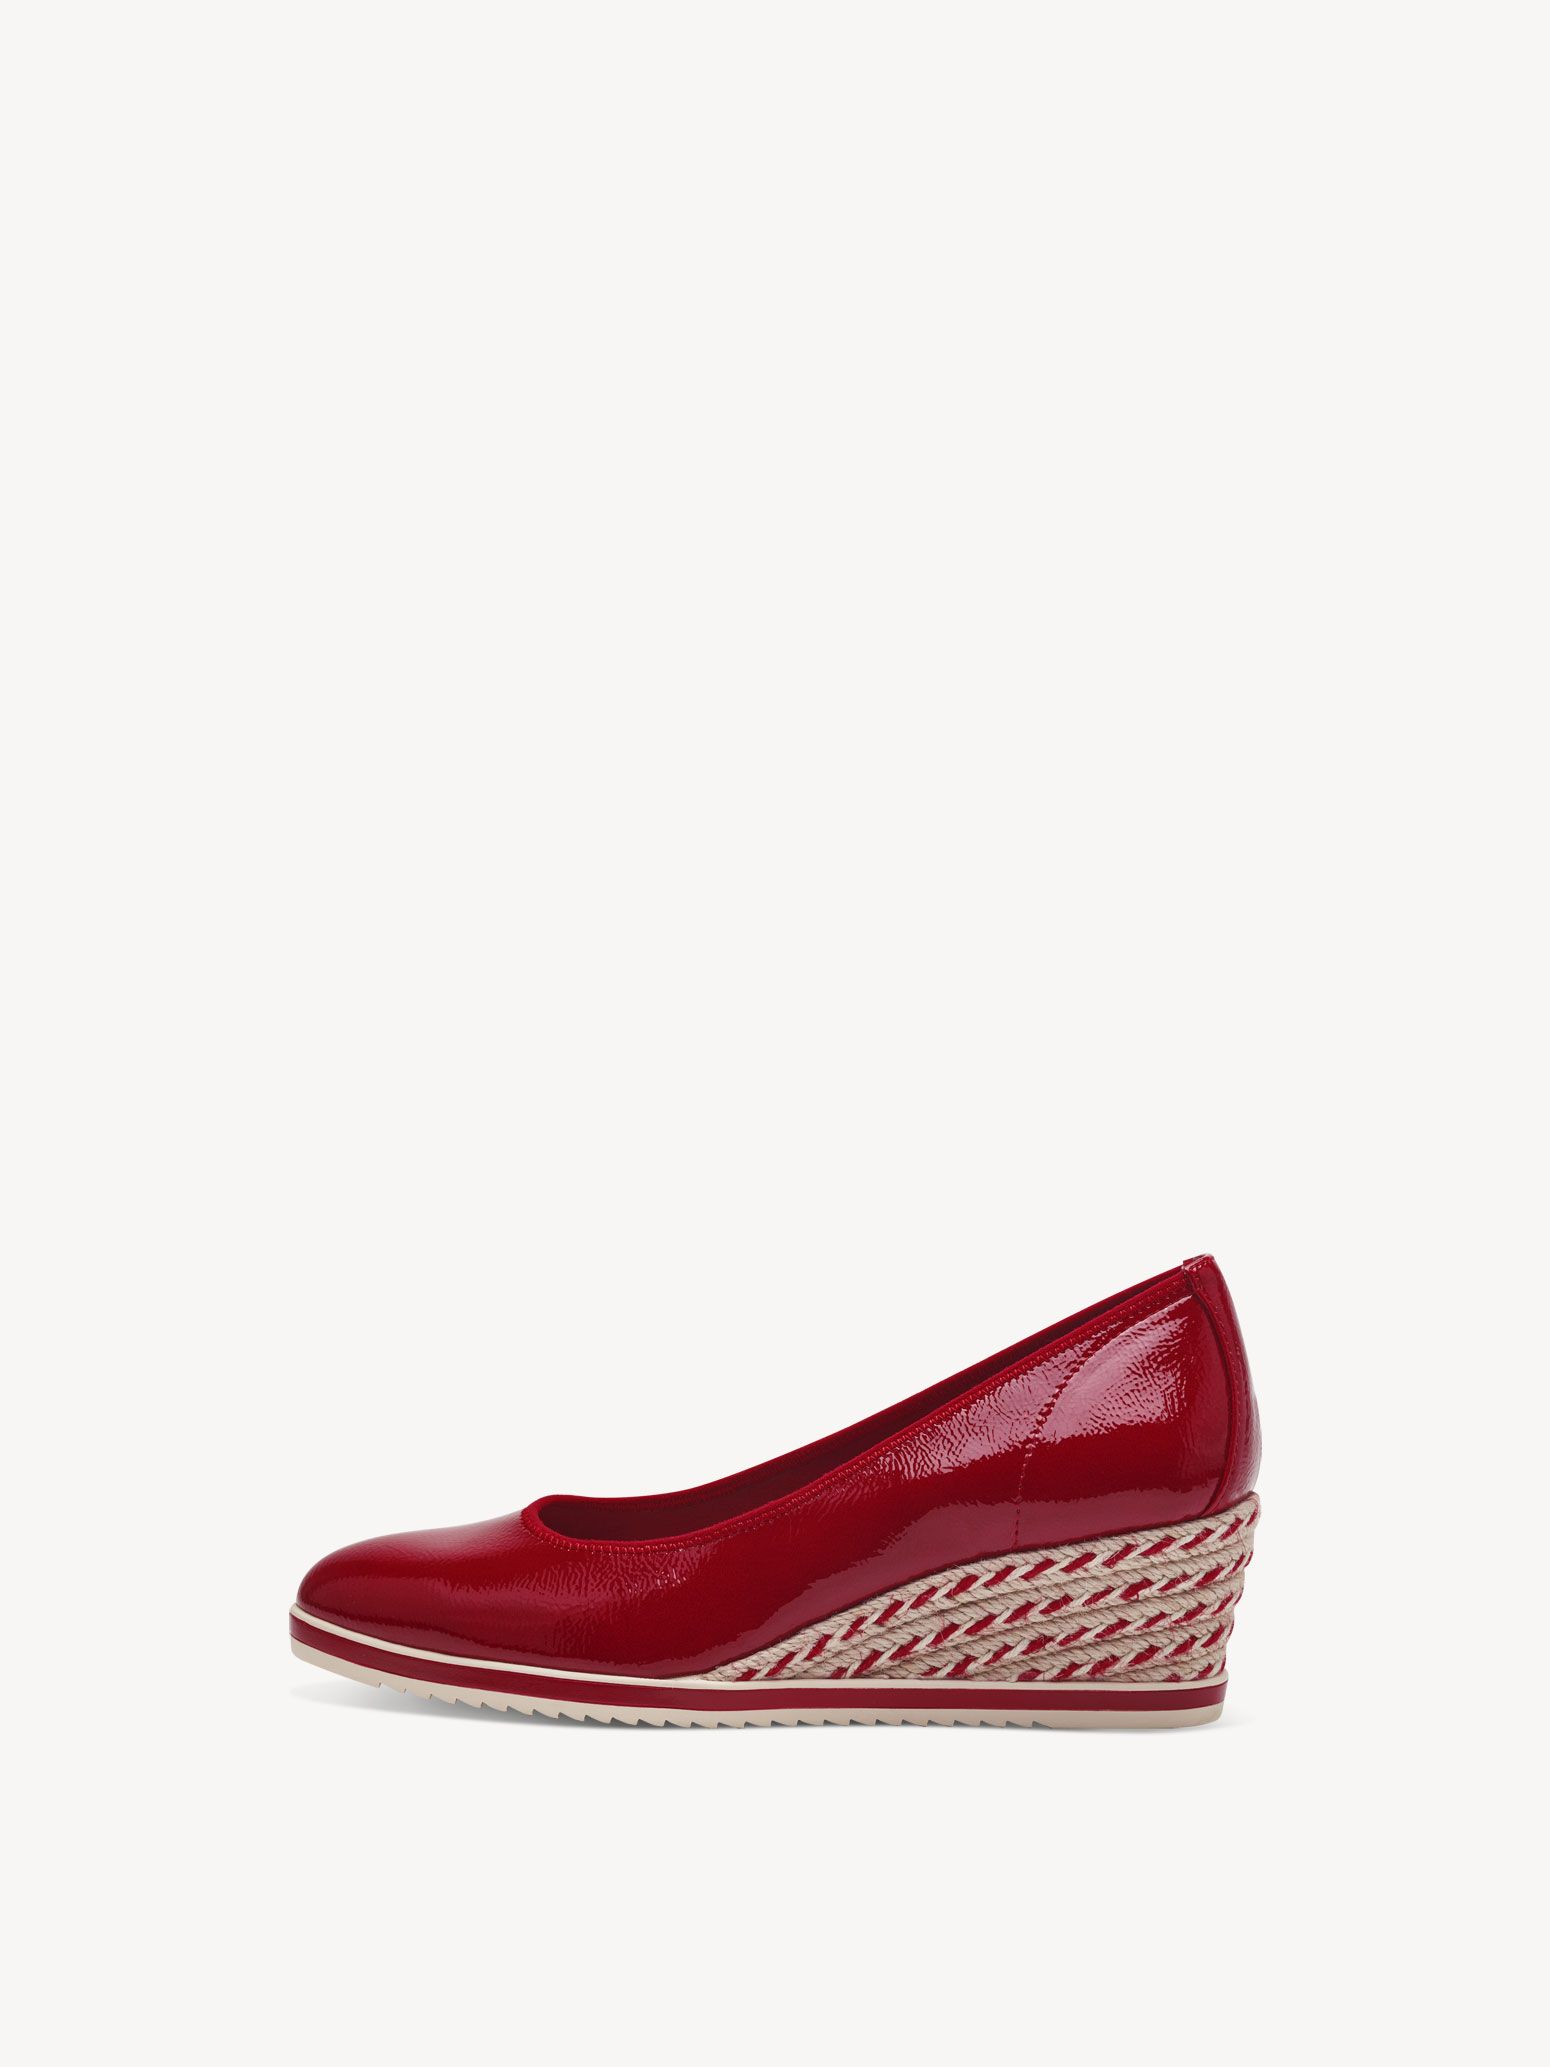 Wedge pumps - red